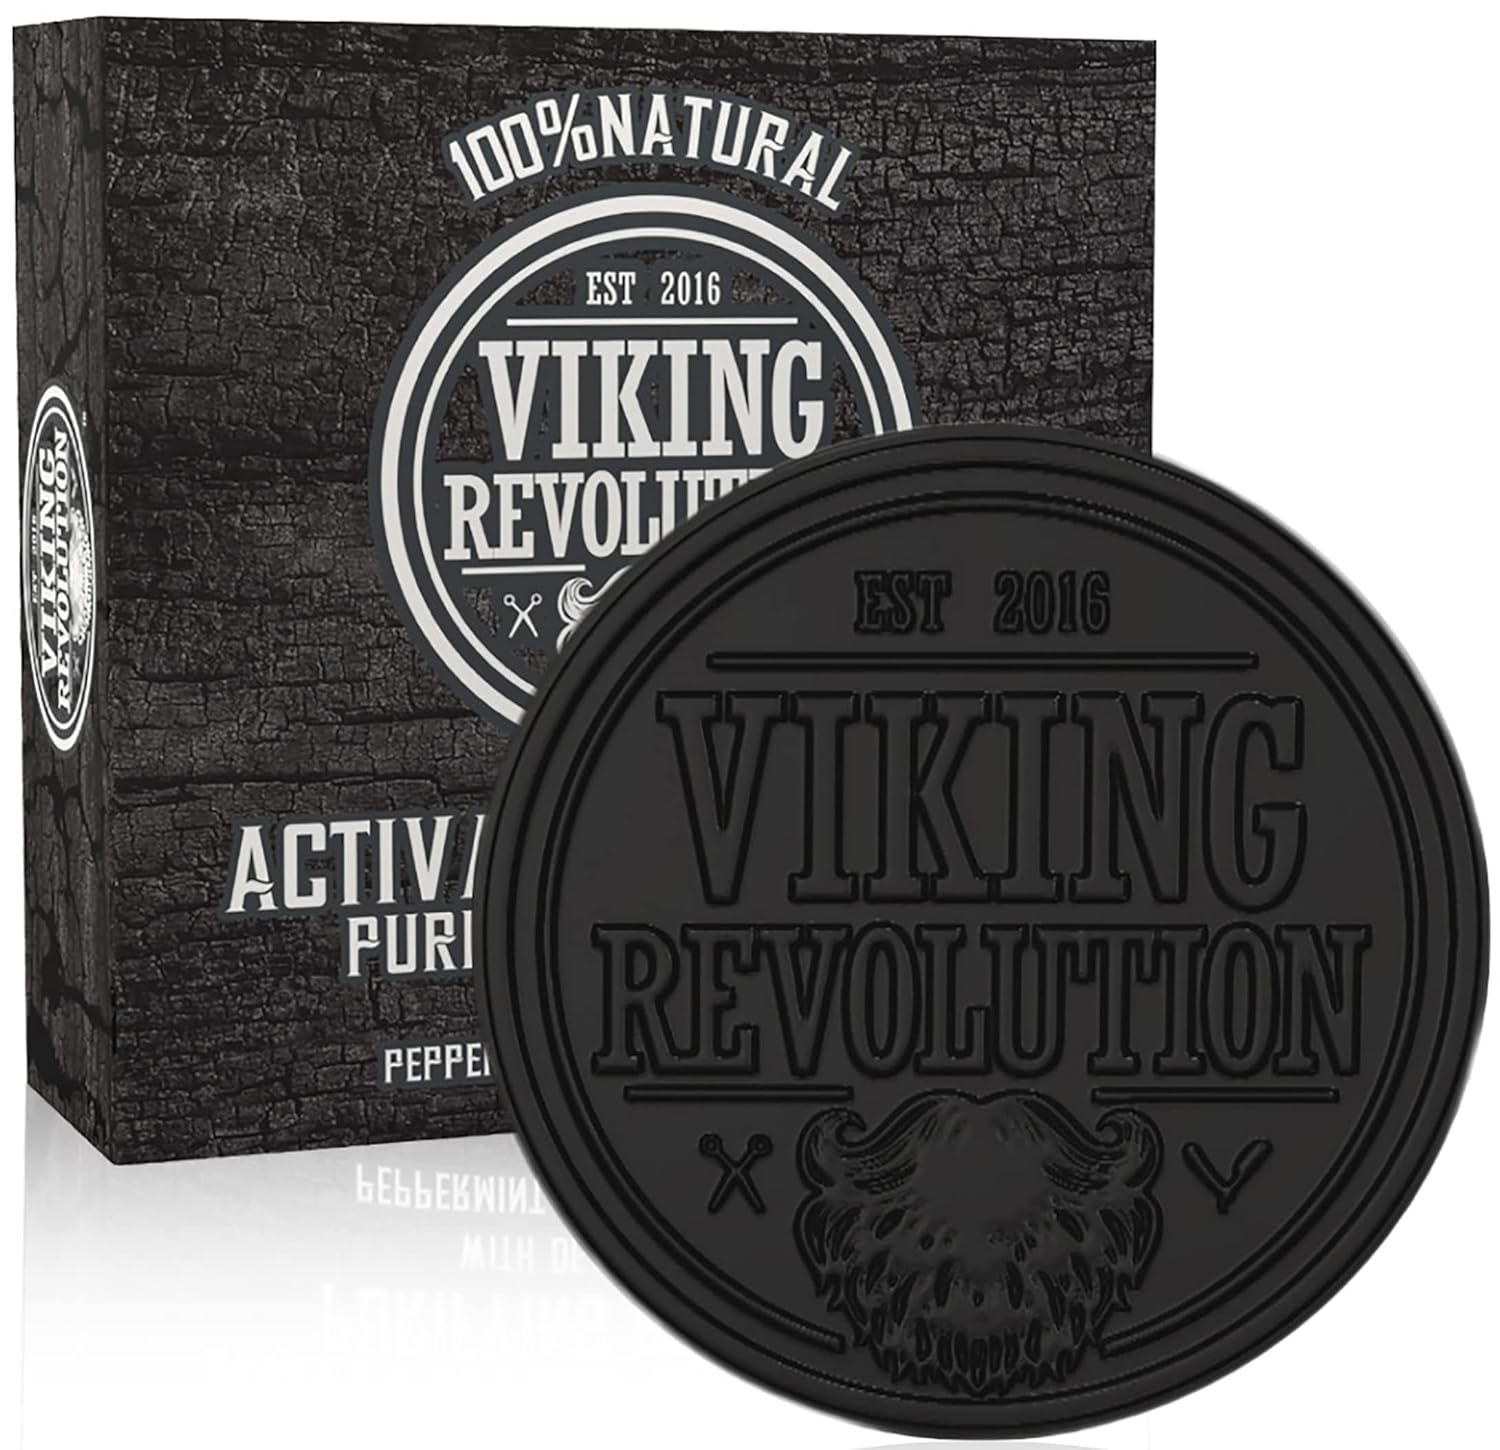 Viking Revolution Skin Cleaning Agent Activated Charcoal Soap for Men w/Dead Sea Mud, Body and Face, Cleanser,Cleansing Blackheads - Peppermint & Eucalyptus Scent 1   (Pack of 1)